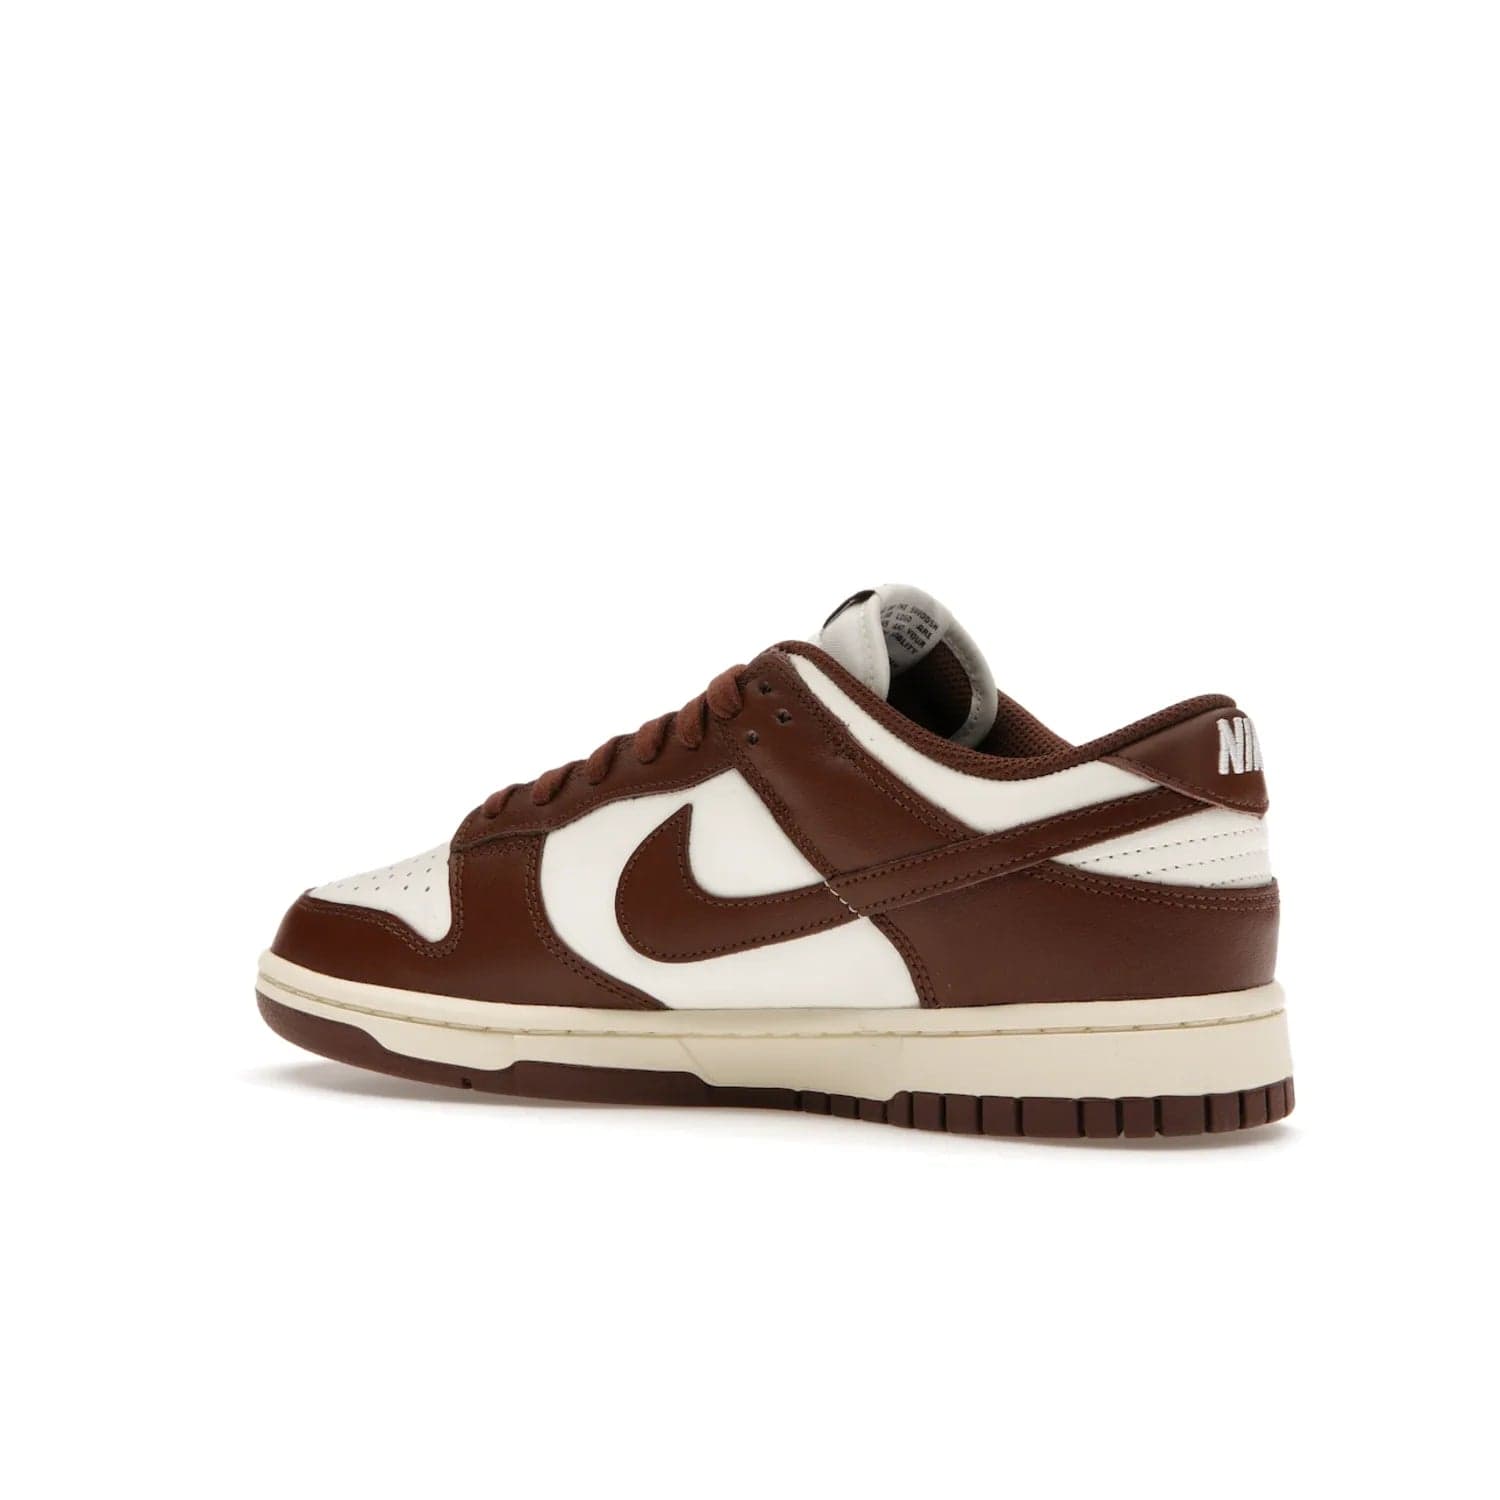 Nike Dunk Low Cacao Wow (Women's) - Image 22 - Only at www.BallersClubKickz.com - Revised
Get the Nike Dunk Low Cacao Wow and make a statement! Plush leather and a cool Cacao Wow finish bring together a unique mix of comfort and fashion that will turn heads. Boosted with a Coconut Milk hue. Shop today.